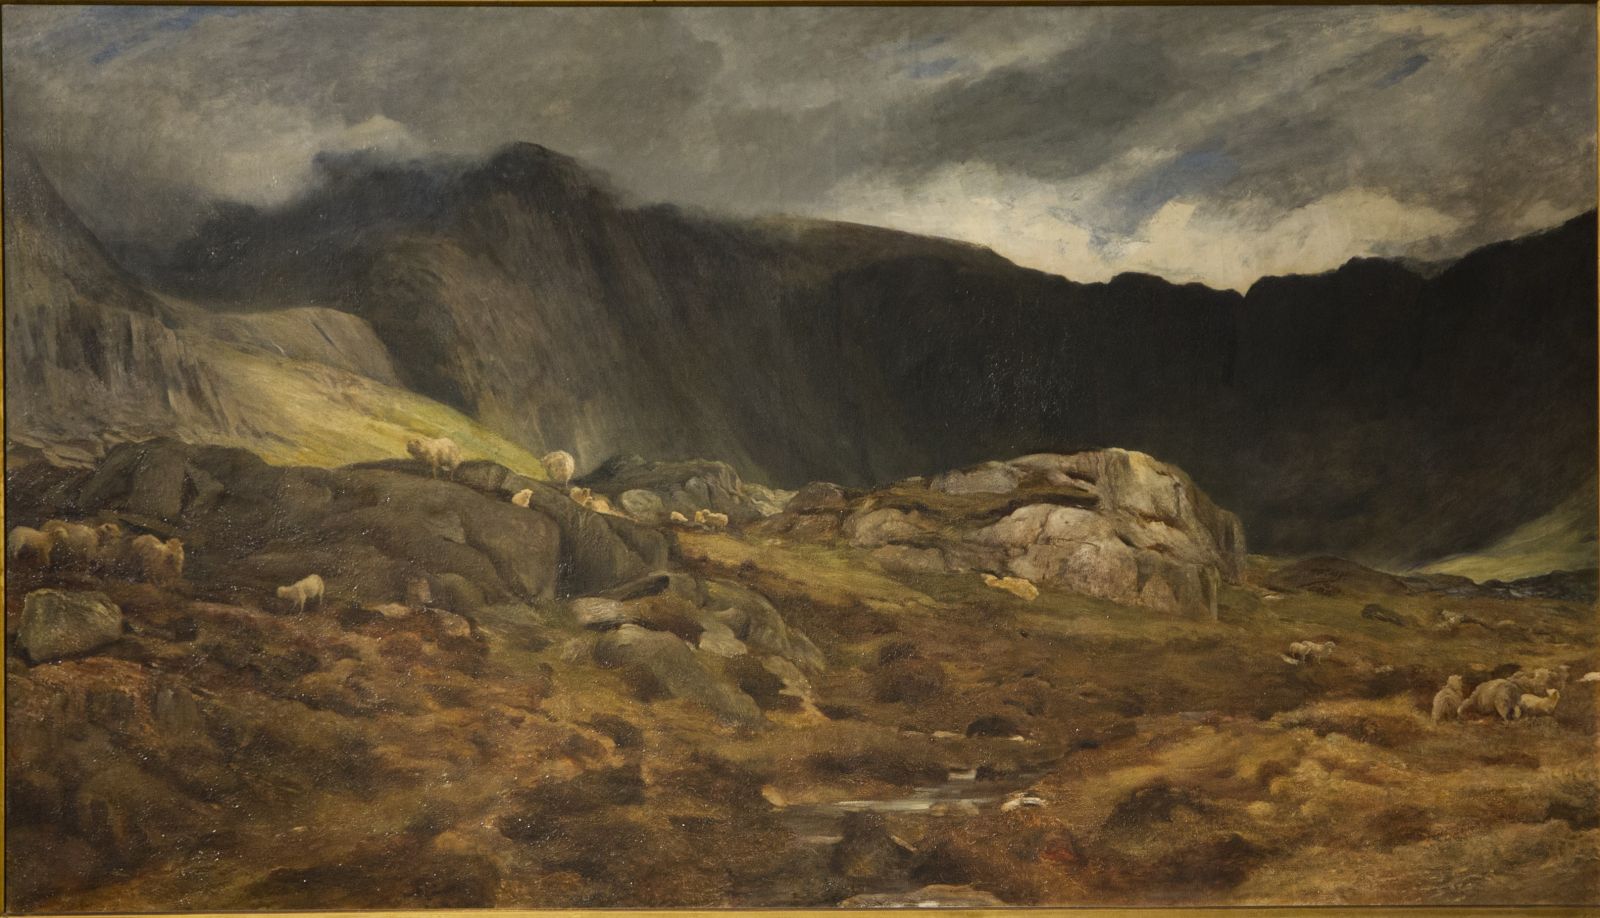 Charles William Mansel Lewis, The Devil’s Kitchen, (Llyn Idwal),1882, oil on canvas, 97 x 184cm  Stradey Castle collection, Llanelli. 